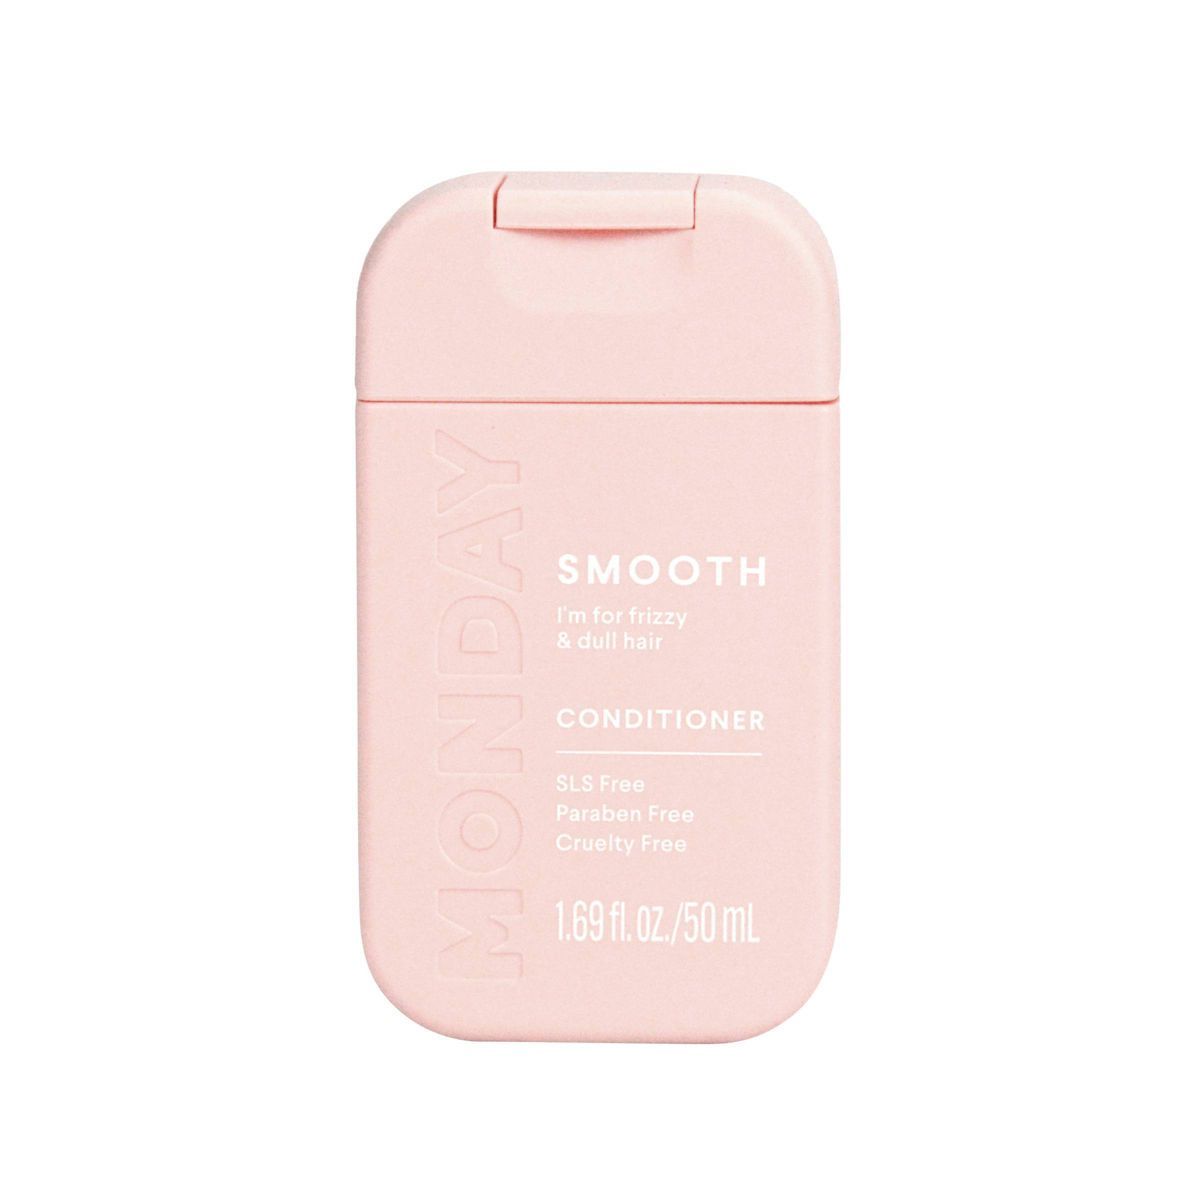 MONDAY Smooth Conditioner | Target